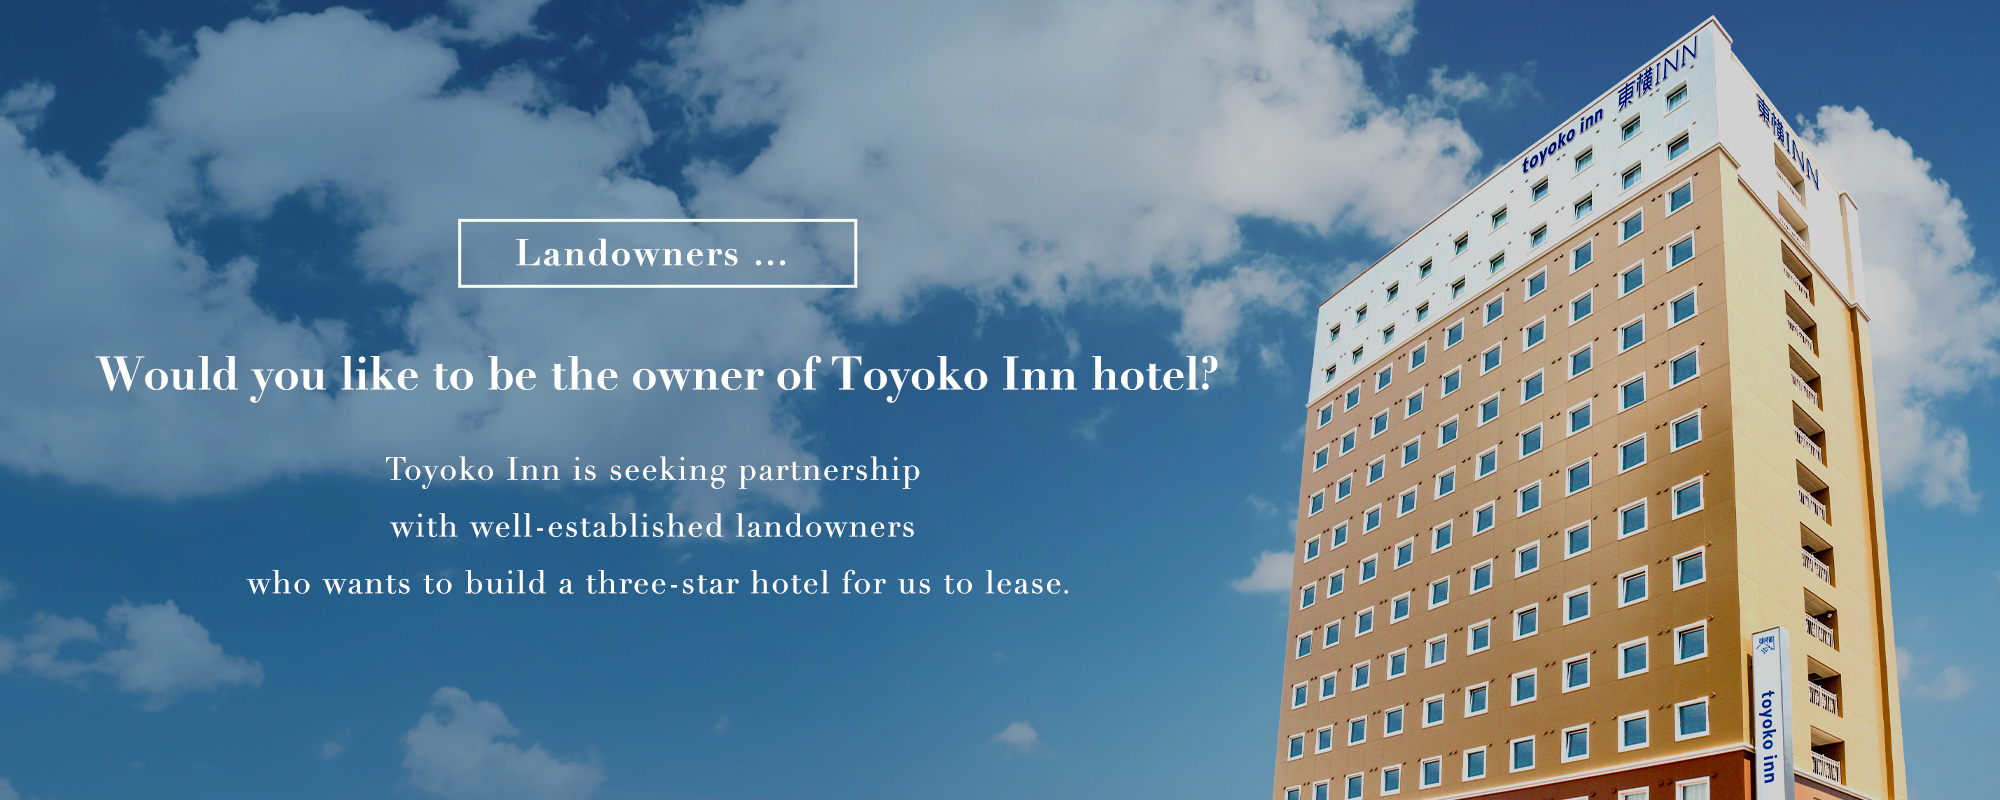 Landowners … Would you like to be the owner of Toyoko Inn hotel?